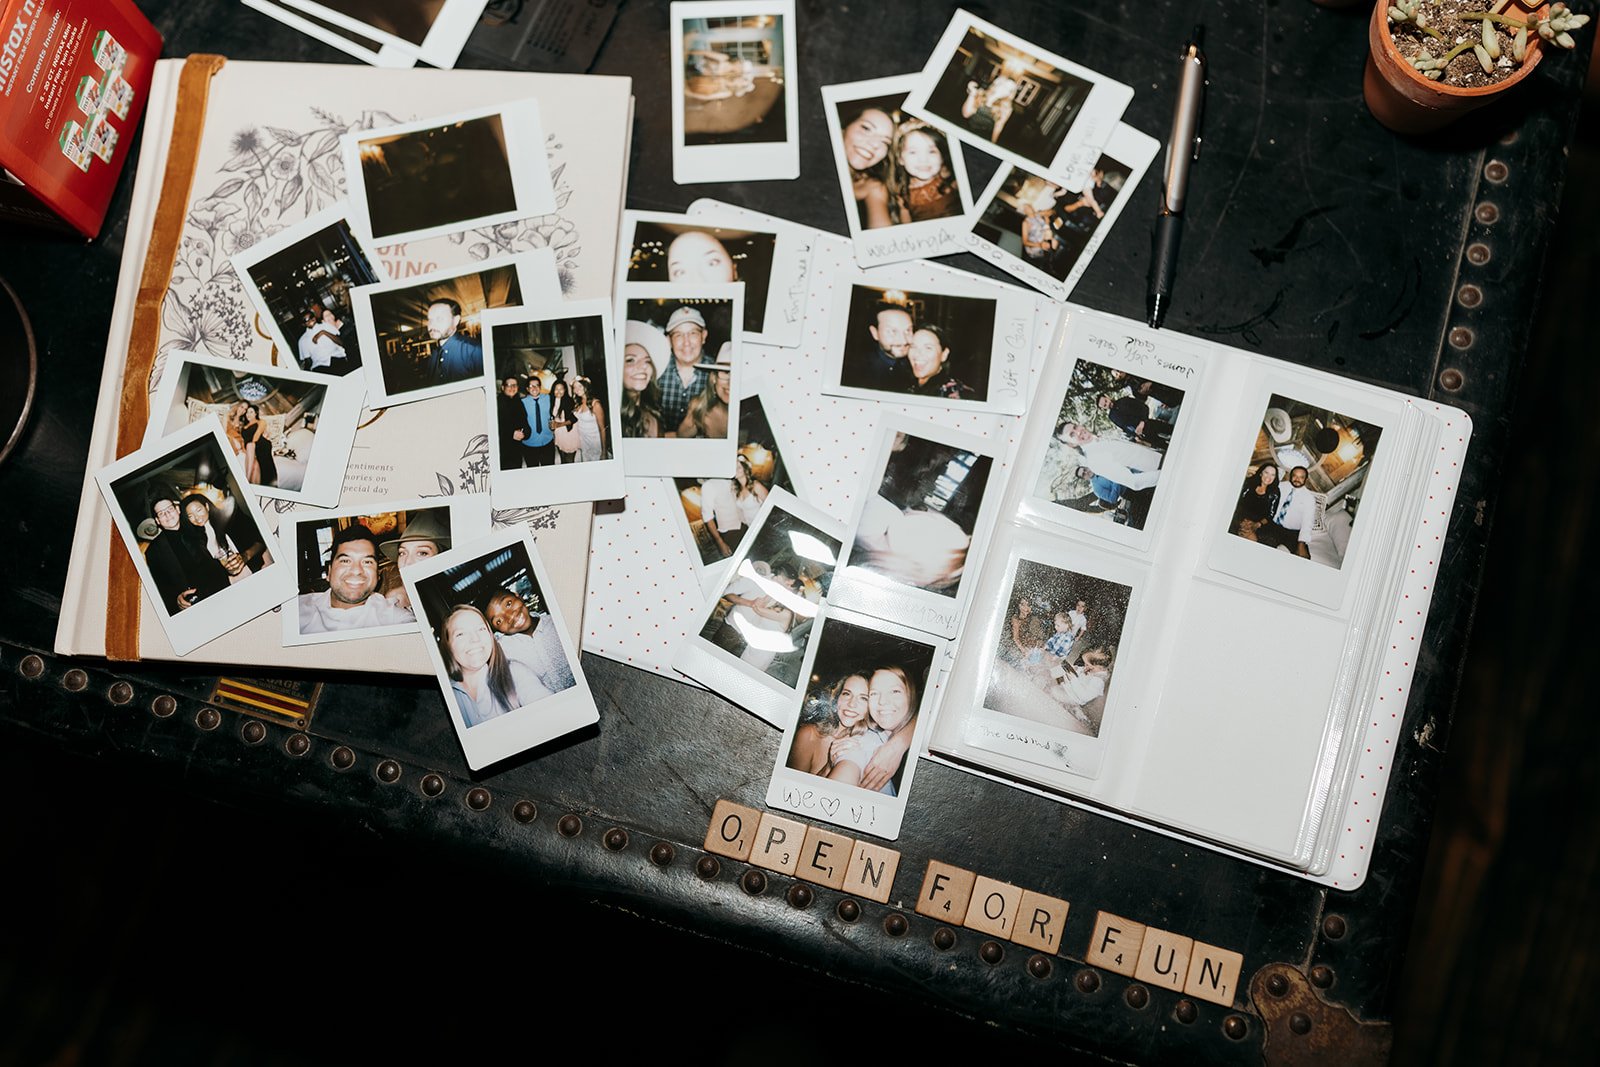 At the end of the night, there were so many polaroids for them to look back on